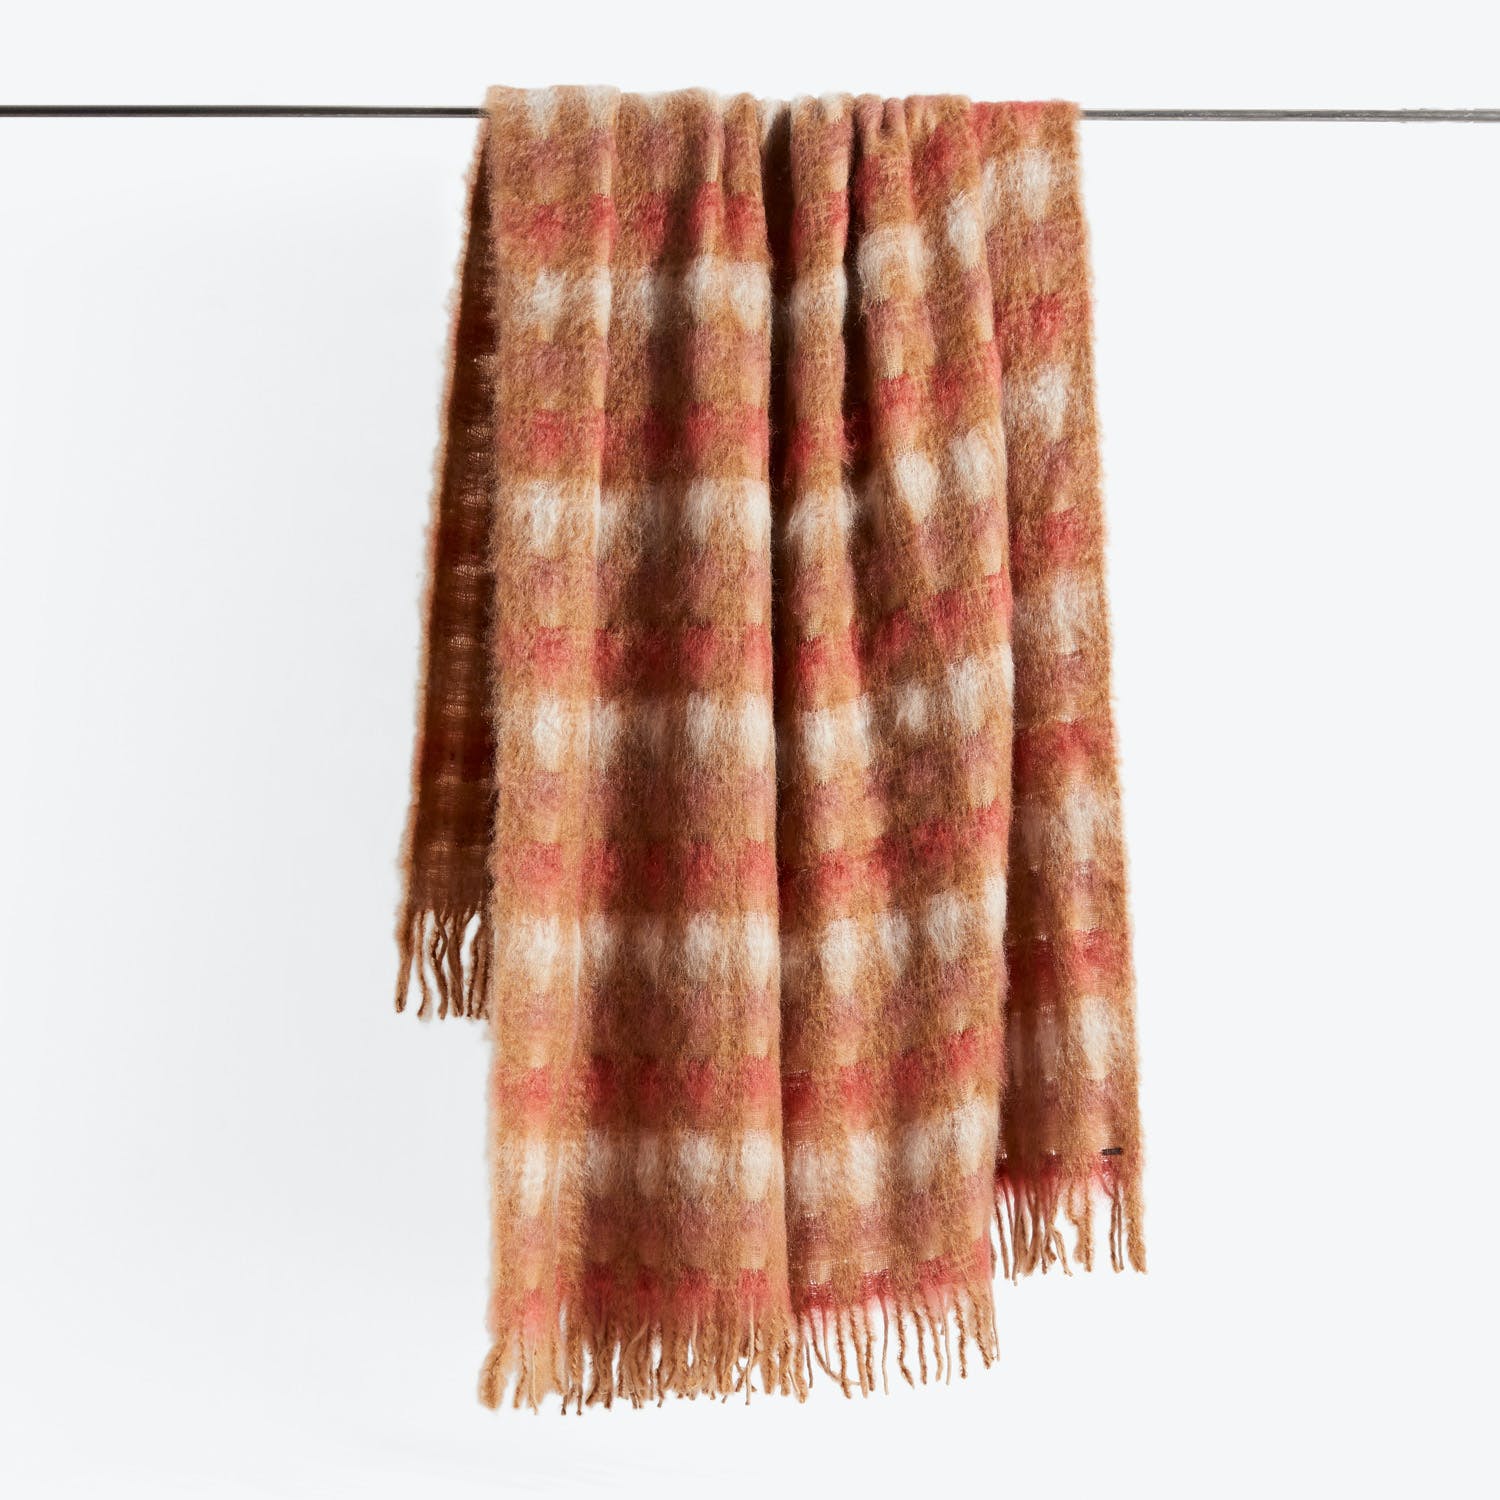 Cozy and stylish plaid scarf with fringe detailing on display.